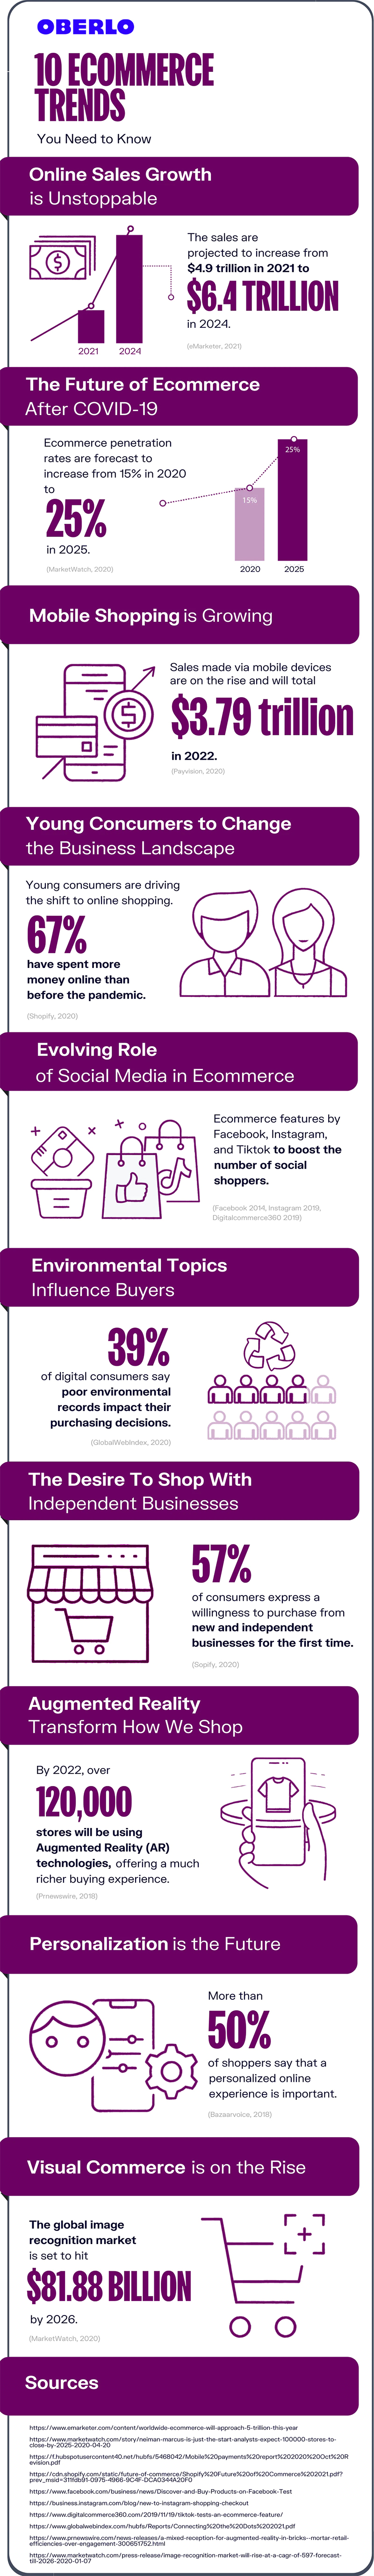 10 ecommerce trends all online shop owners need to know in 2021 infographic